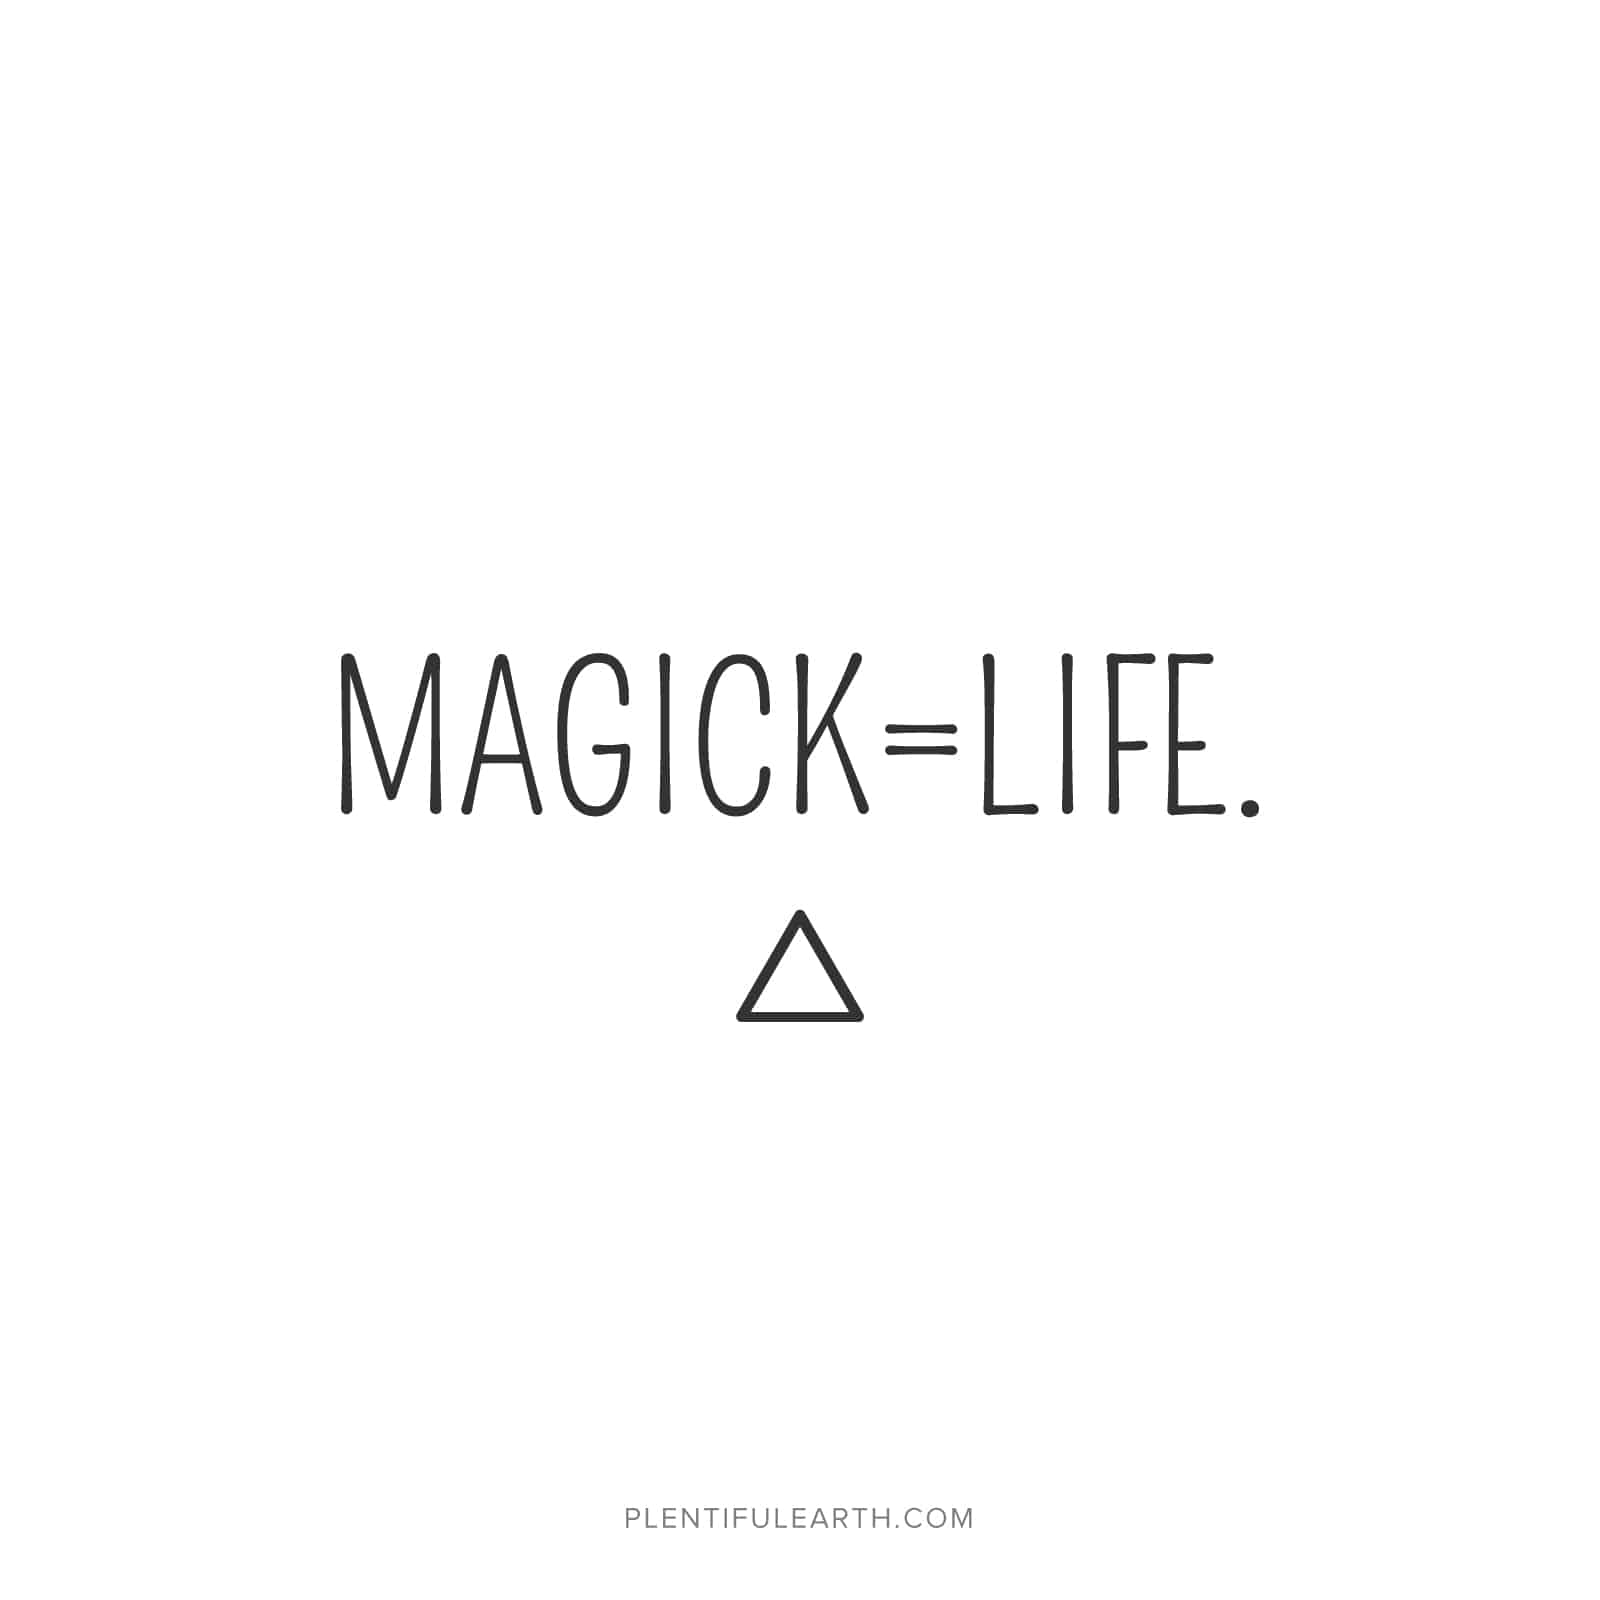 A spiritual phrase equating magic to life, symbolized by a triangle below the text.